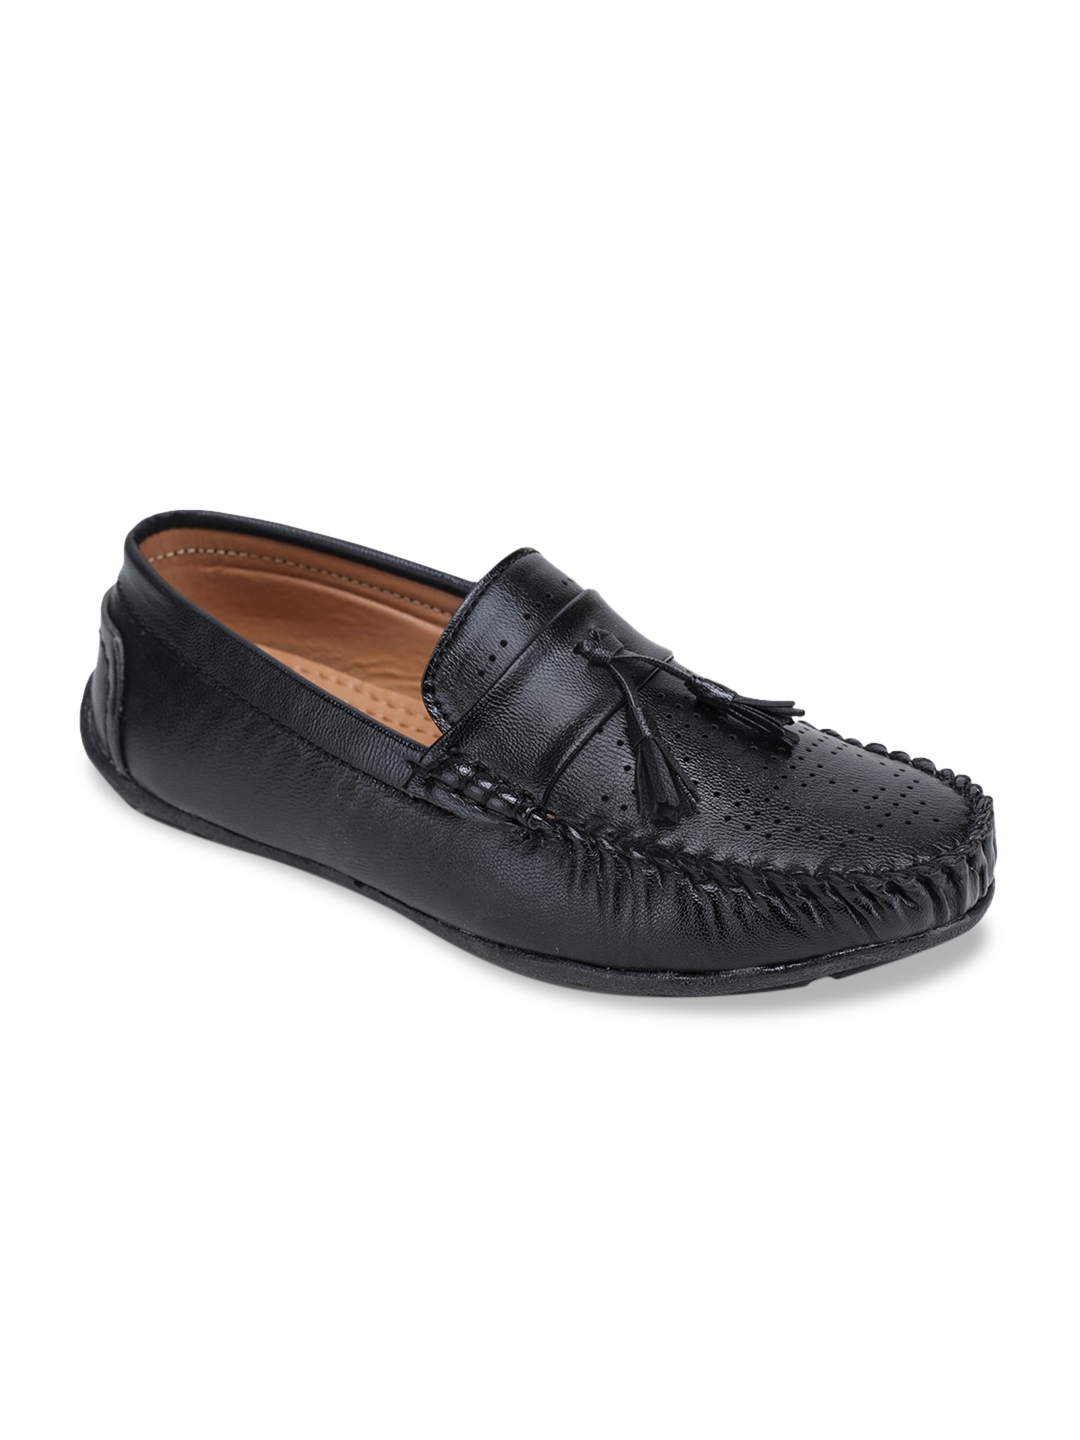 Buy TRASE Boys Black Loafers - Casual Shoes for Boys 14208412 | Myntra